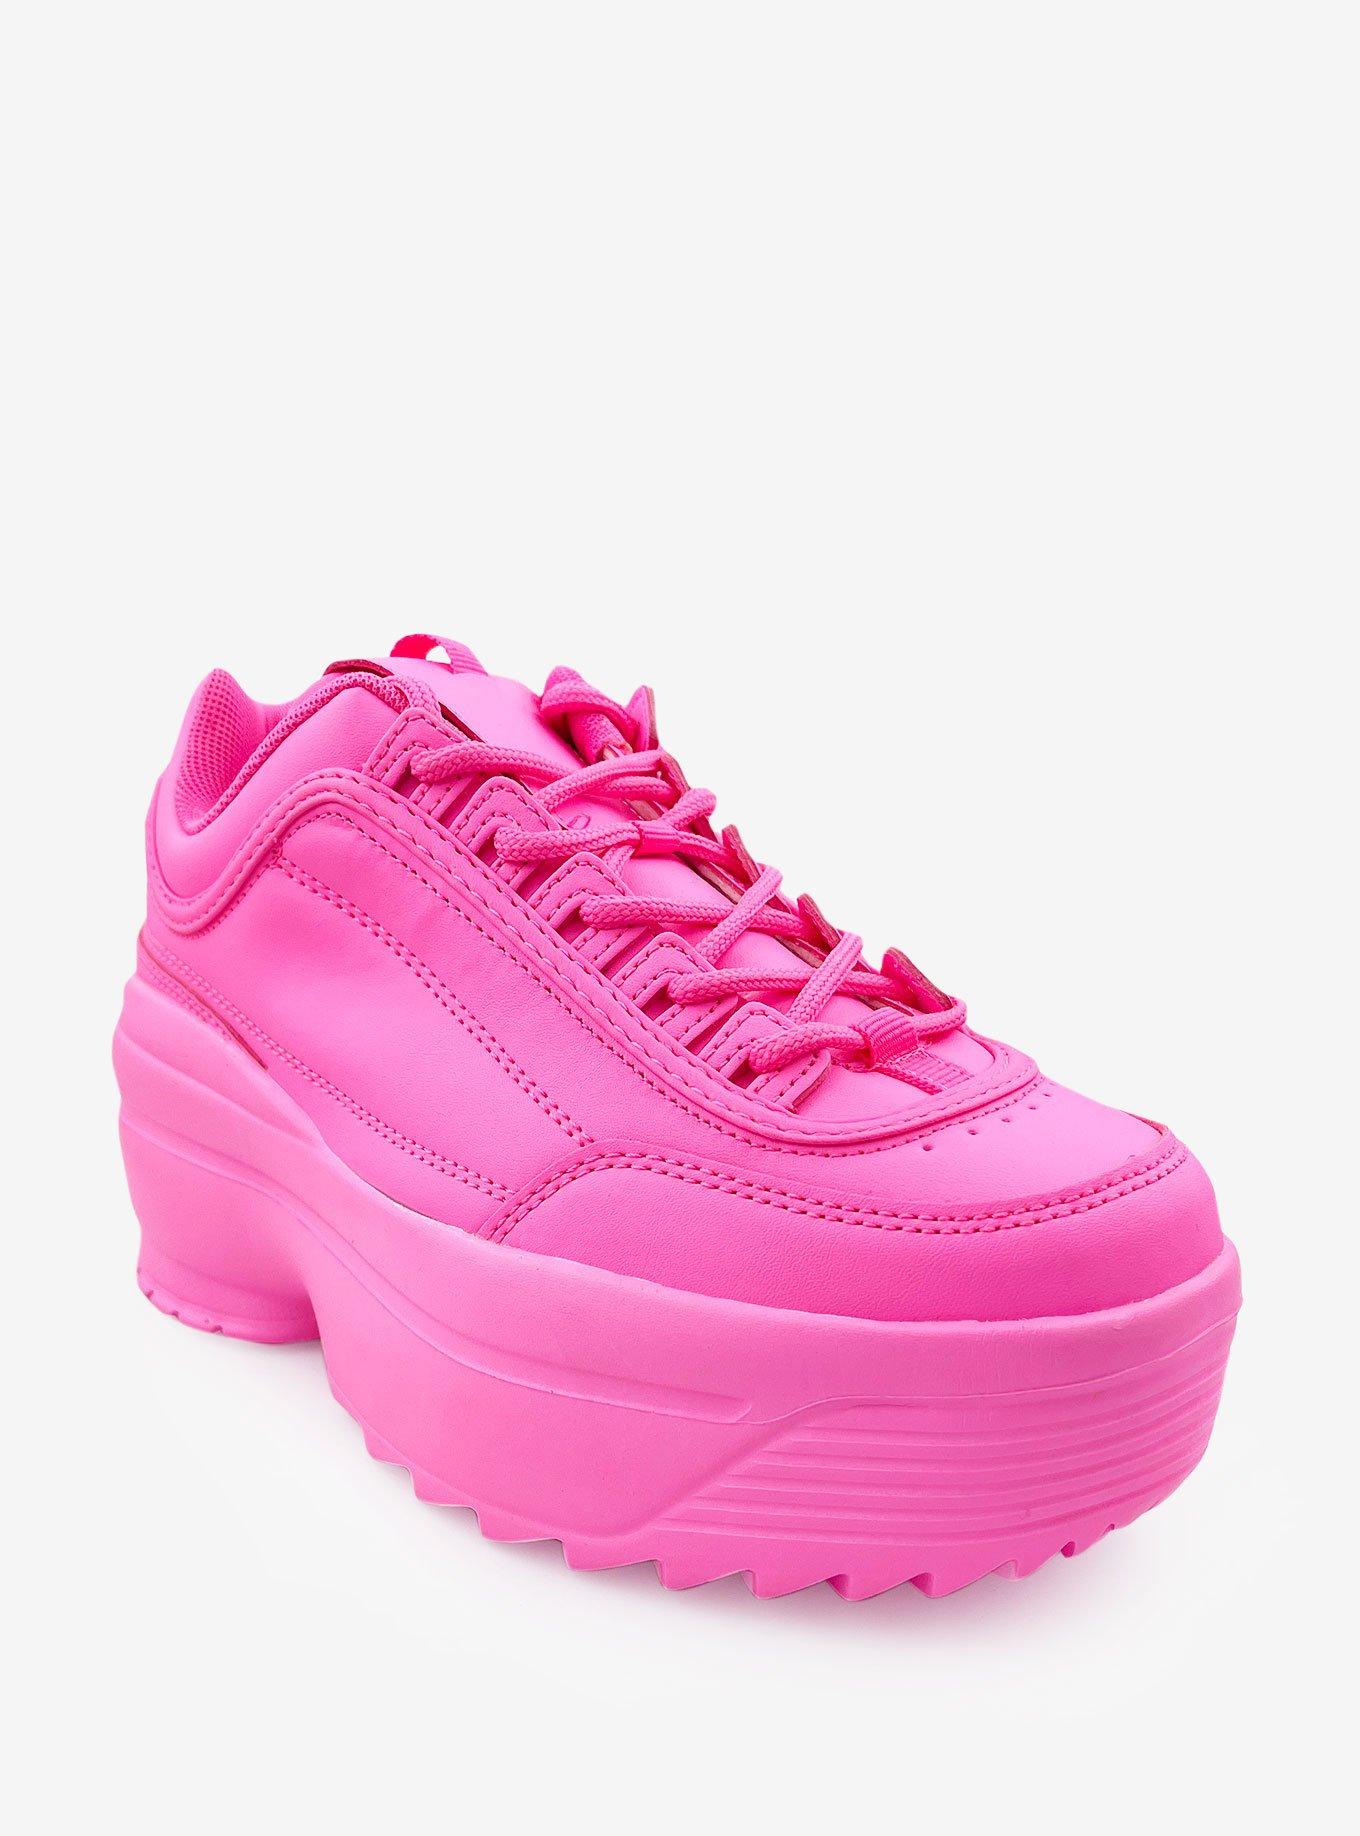 Lily Platform Sneaker Pink | Hot Topic